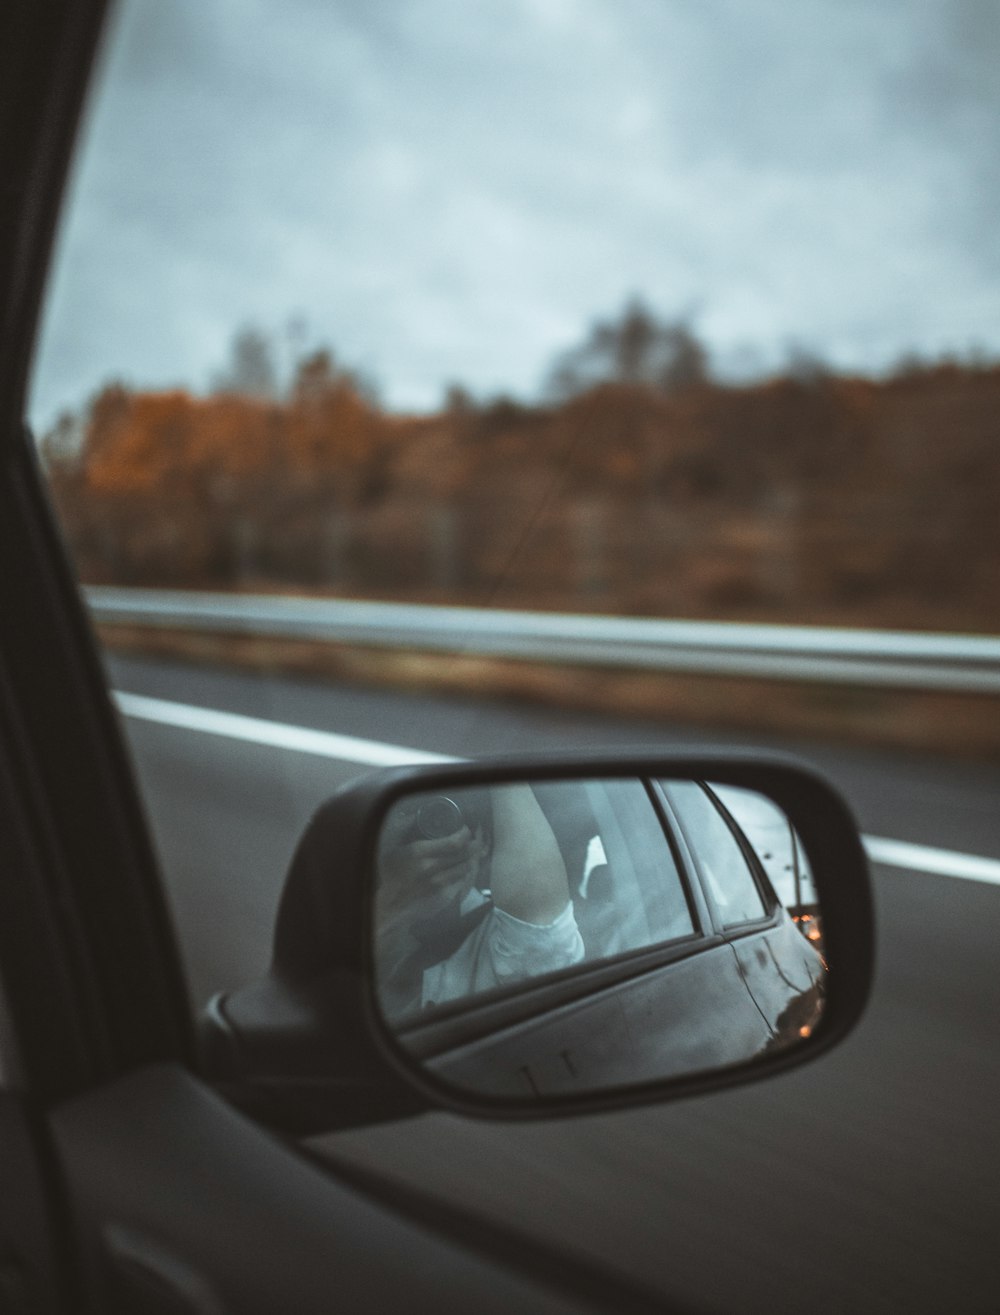 30k+ Rear View Mirror Pictures  Download Free Images on Unsplash